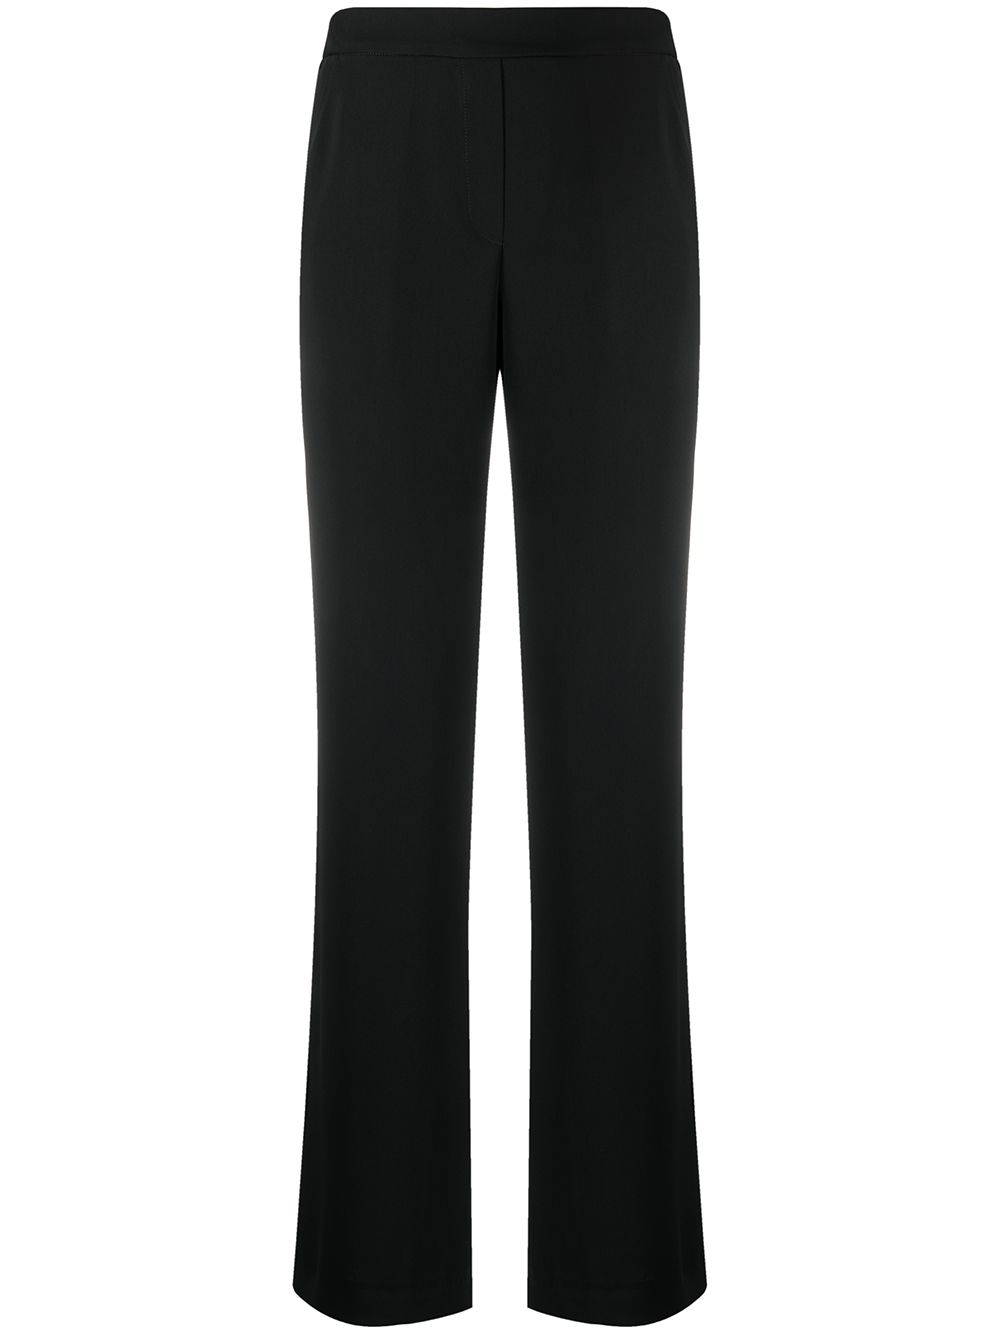 P.A.R.O.S.H. wide-leg pull-on Trousers - Farfetch